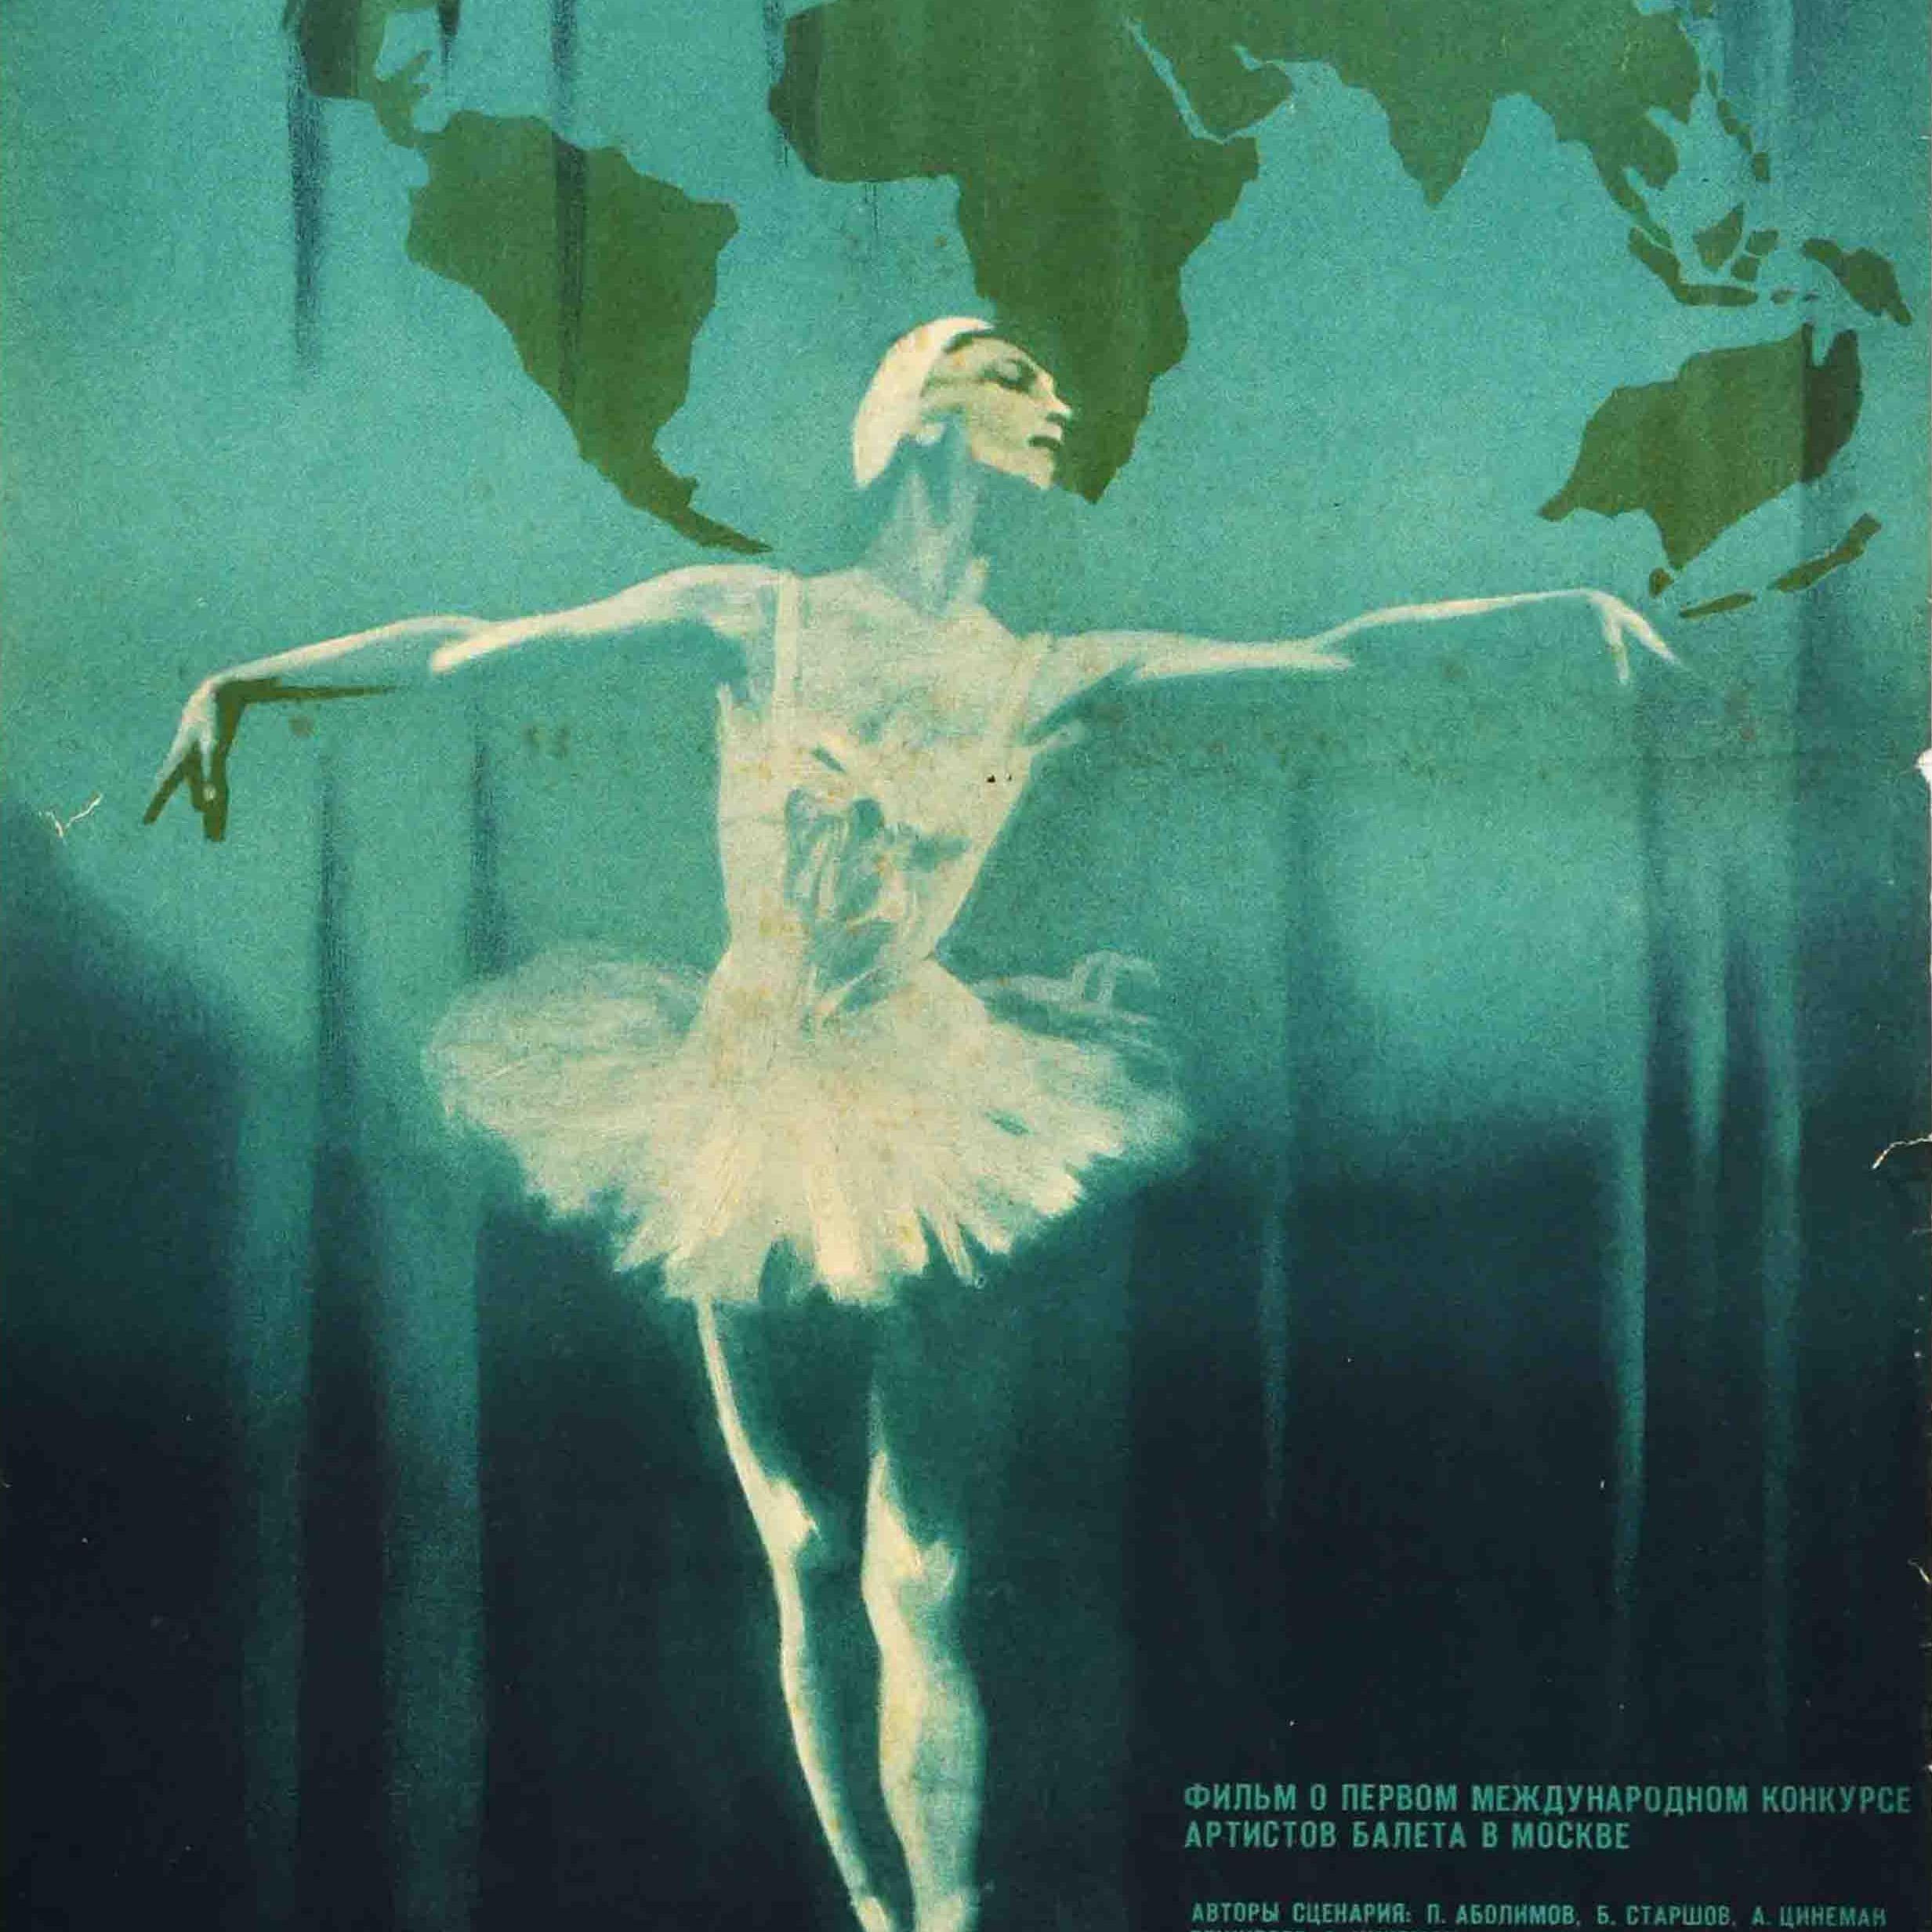 Original Vintage Soviet Film Poster Young Ballet Of The World USSR Ballerina Art - Print by Unknown